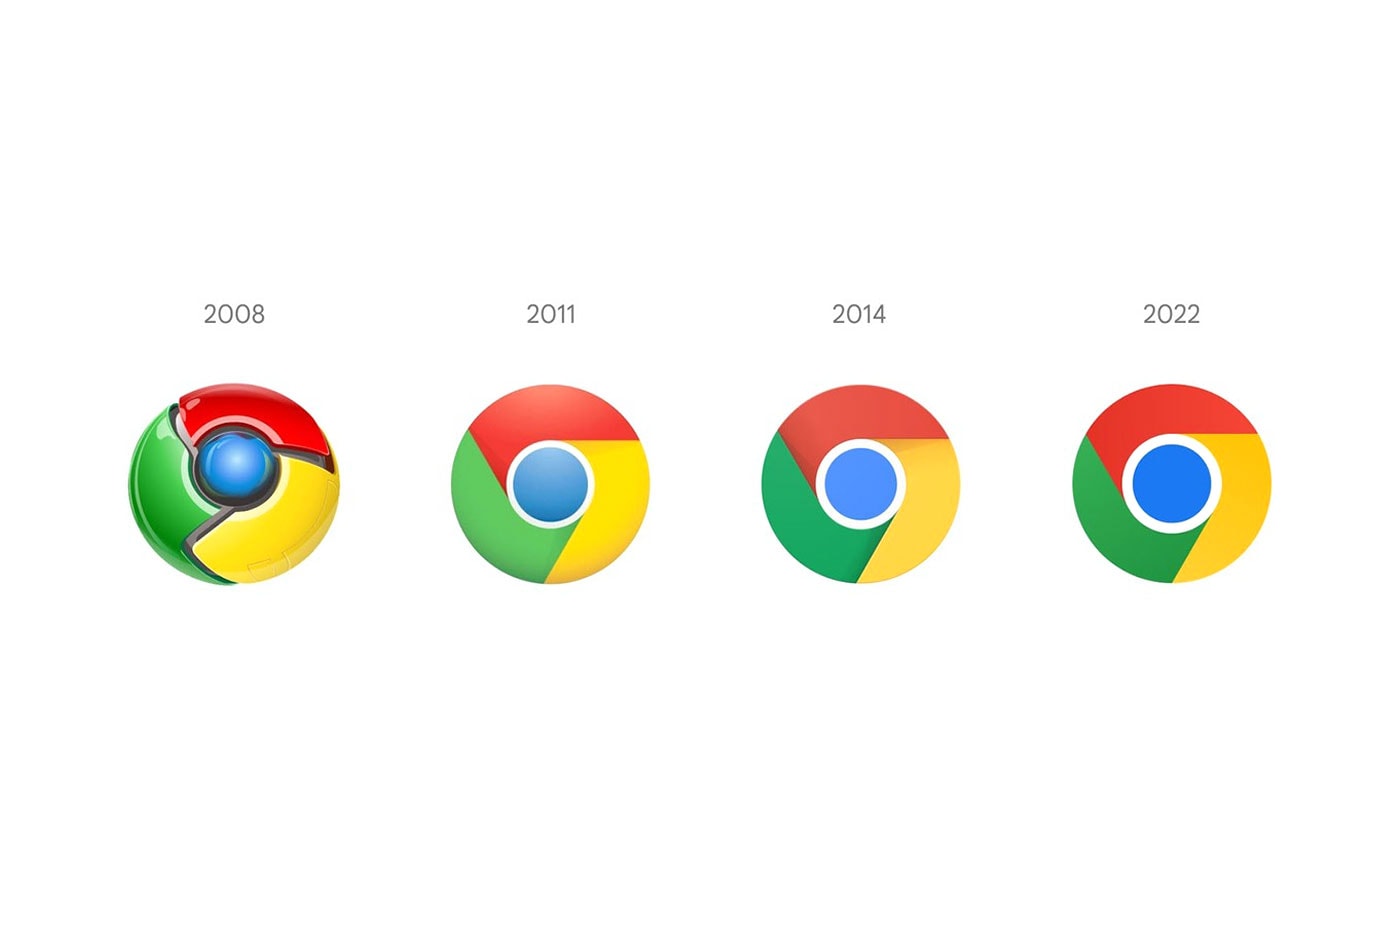 Google Chrome Changes Icon Design for First Time in 8 Years elvin hu twitter flatter simpler gradients larger blue circle news